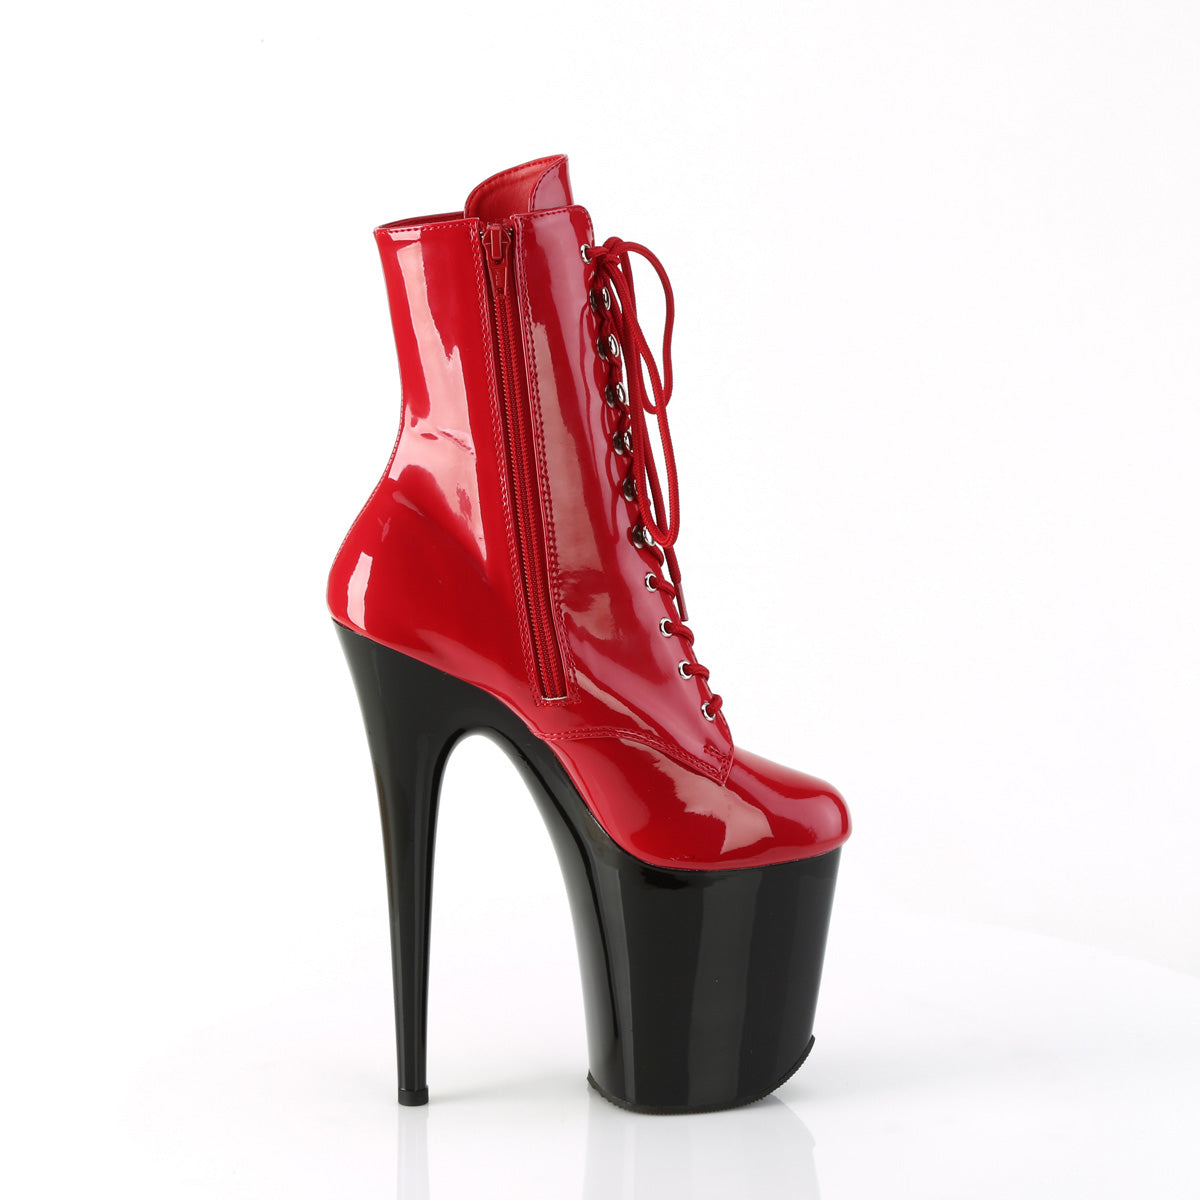 FLAMINGO-1020 Pleasers Ankle Boots Red Pat